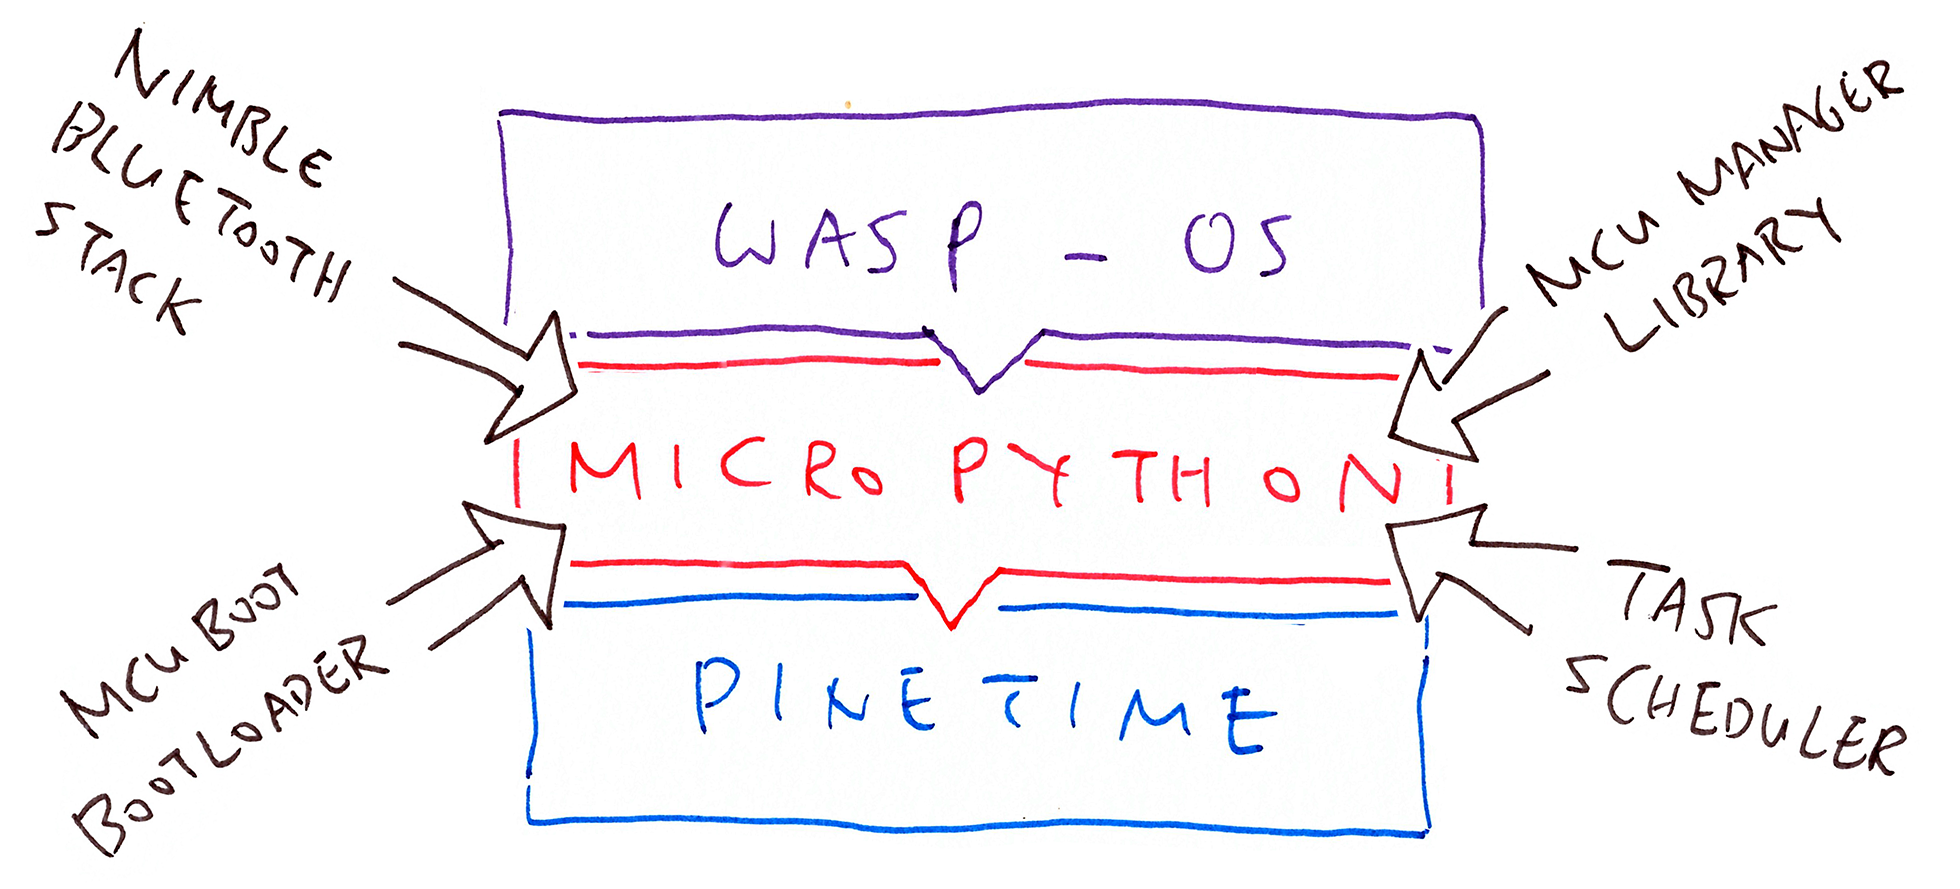 MicroPython and wasp-os without Mynewt